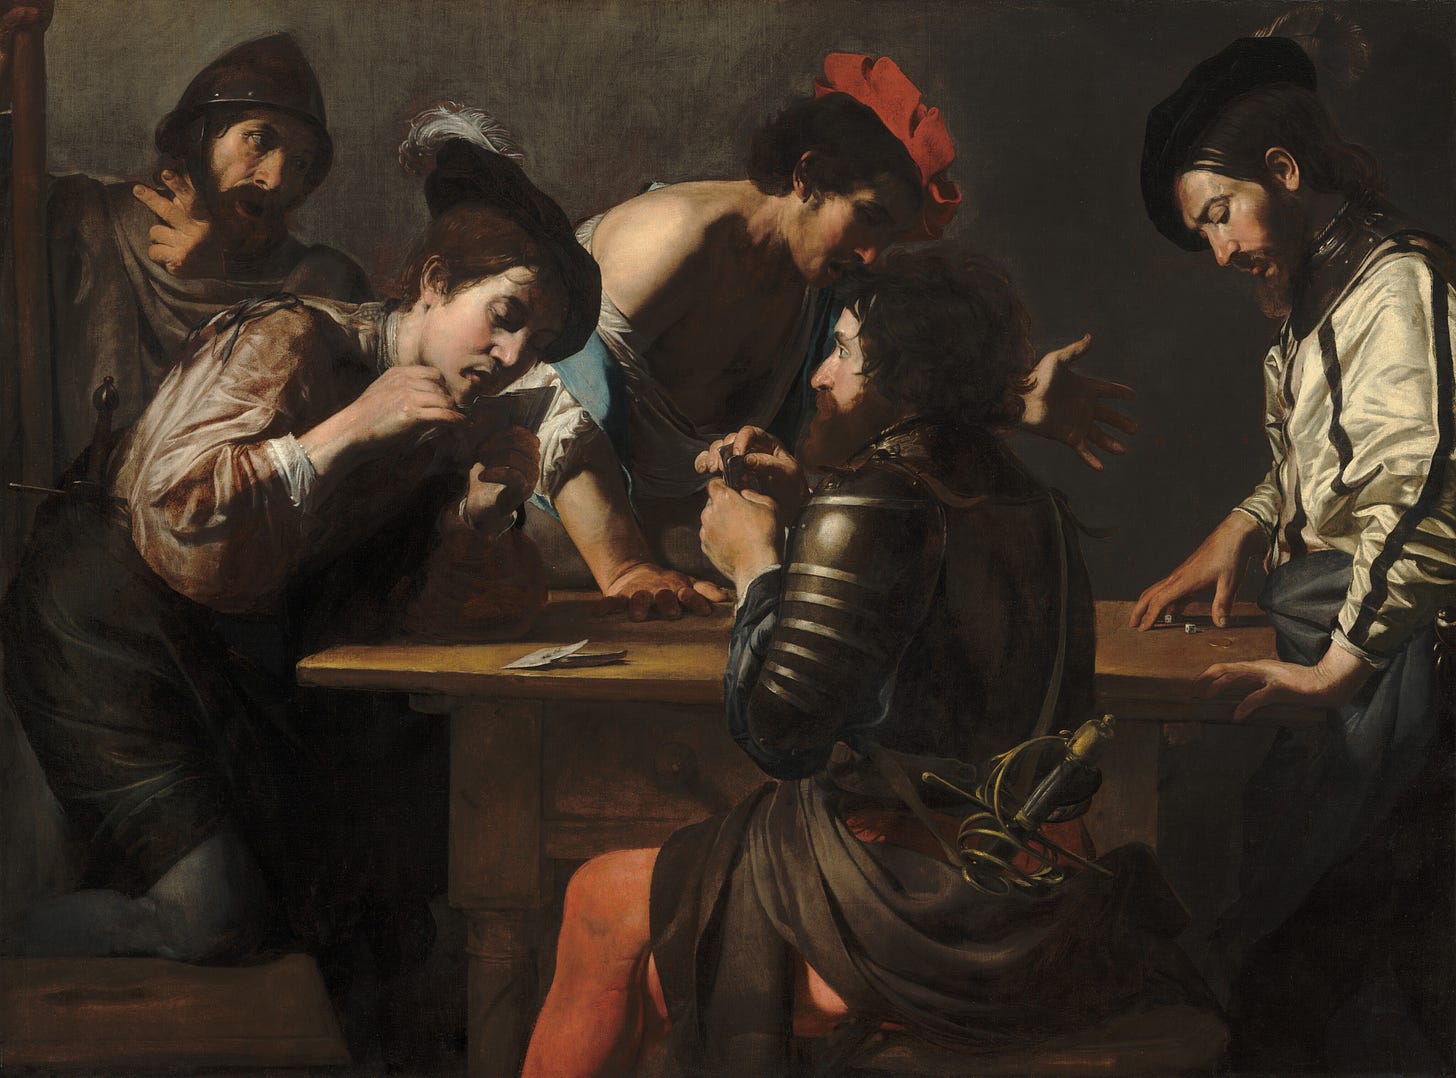 Soldiers Playing Cards and Dice (The Cheats), c. 1618/1620 by Valentin de Boulogne